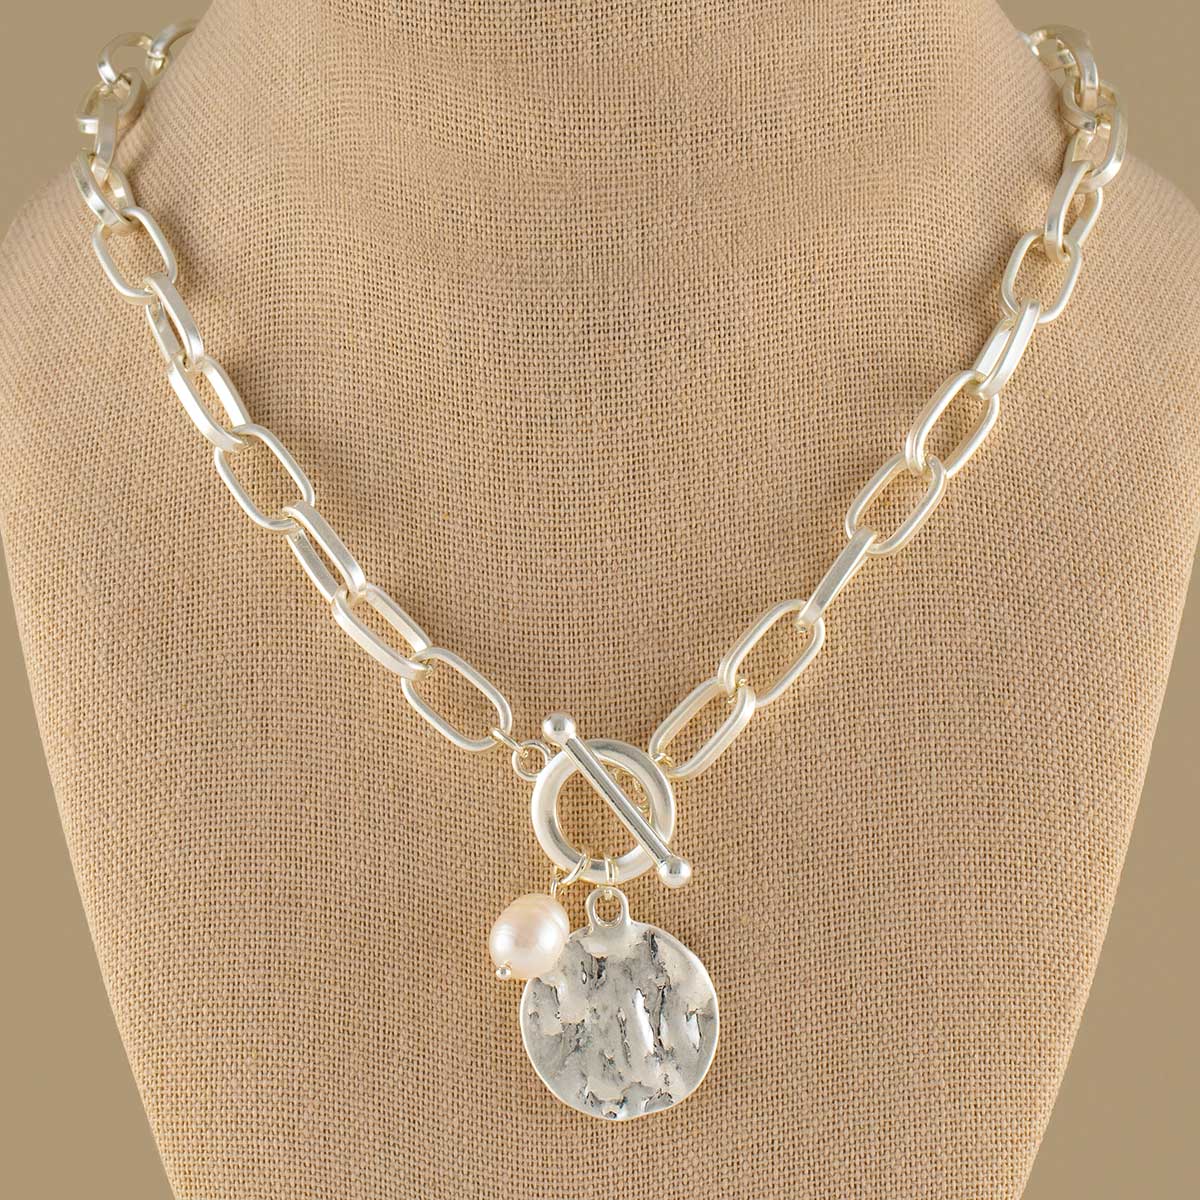 NECKLACE LINKS CIRCLE PEARL SILVER TOGGLE